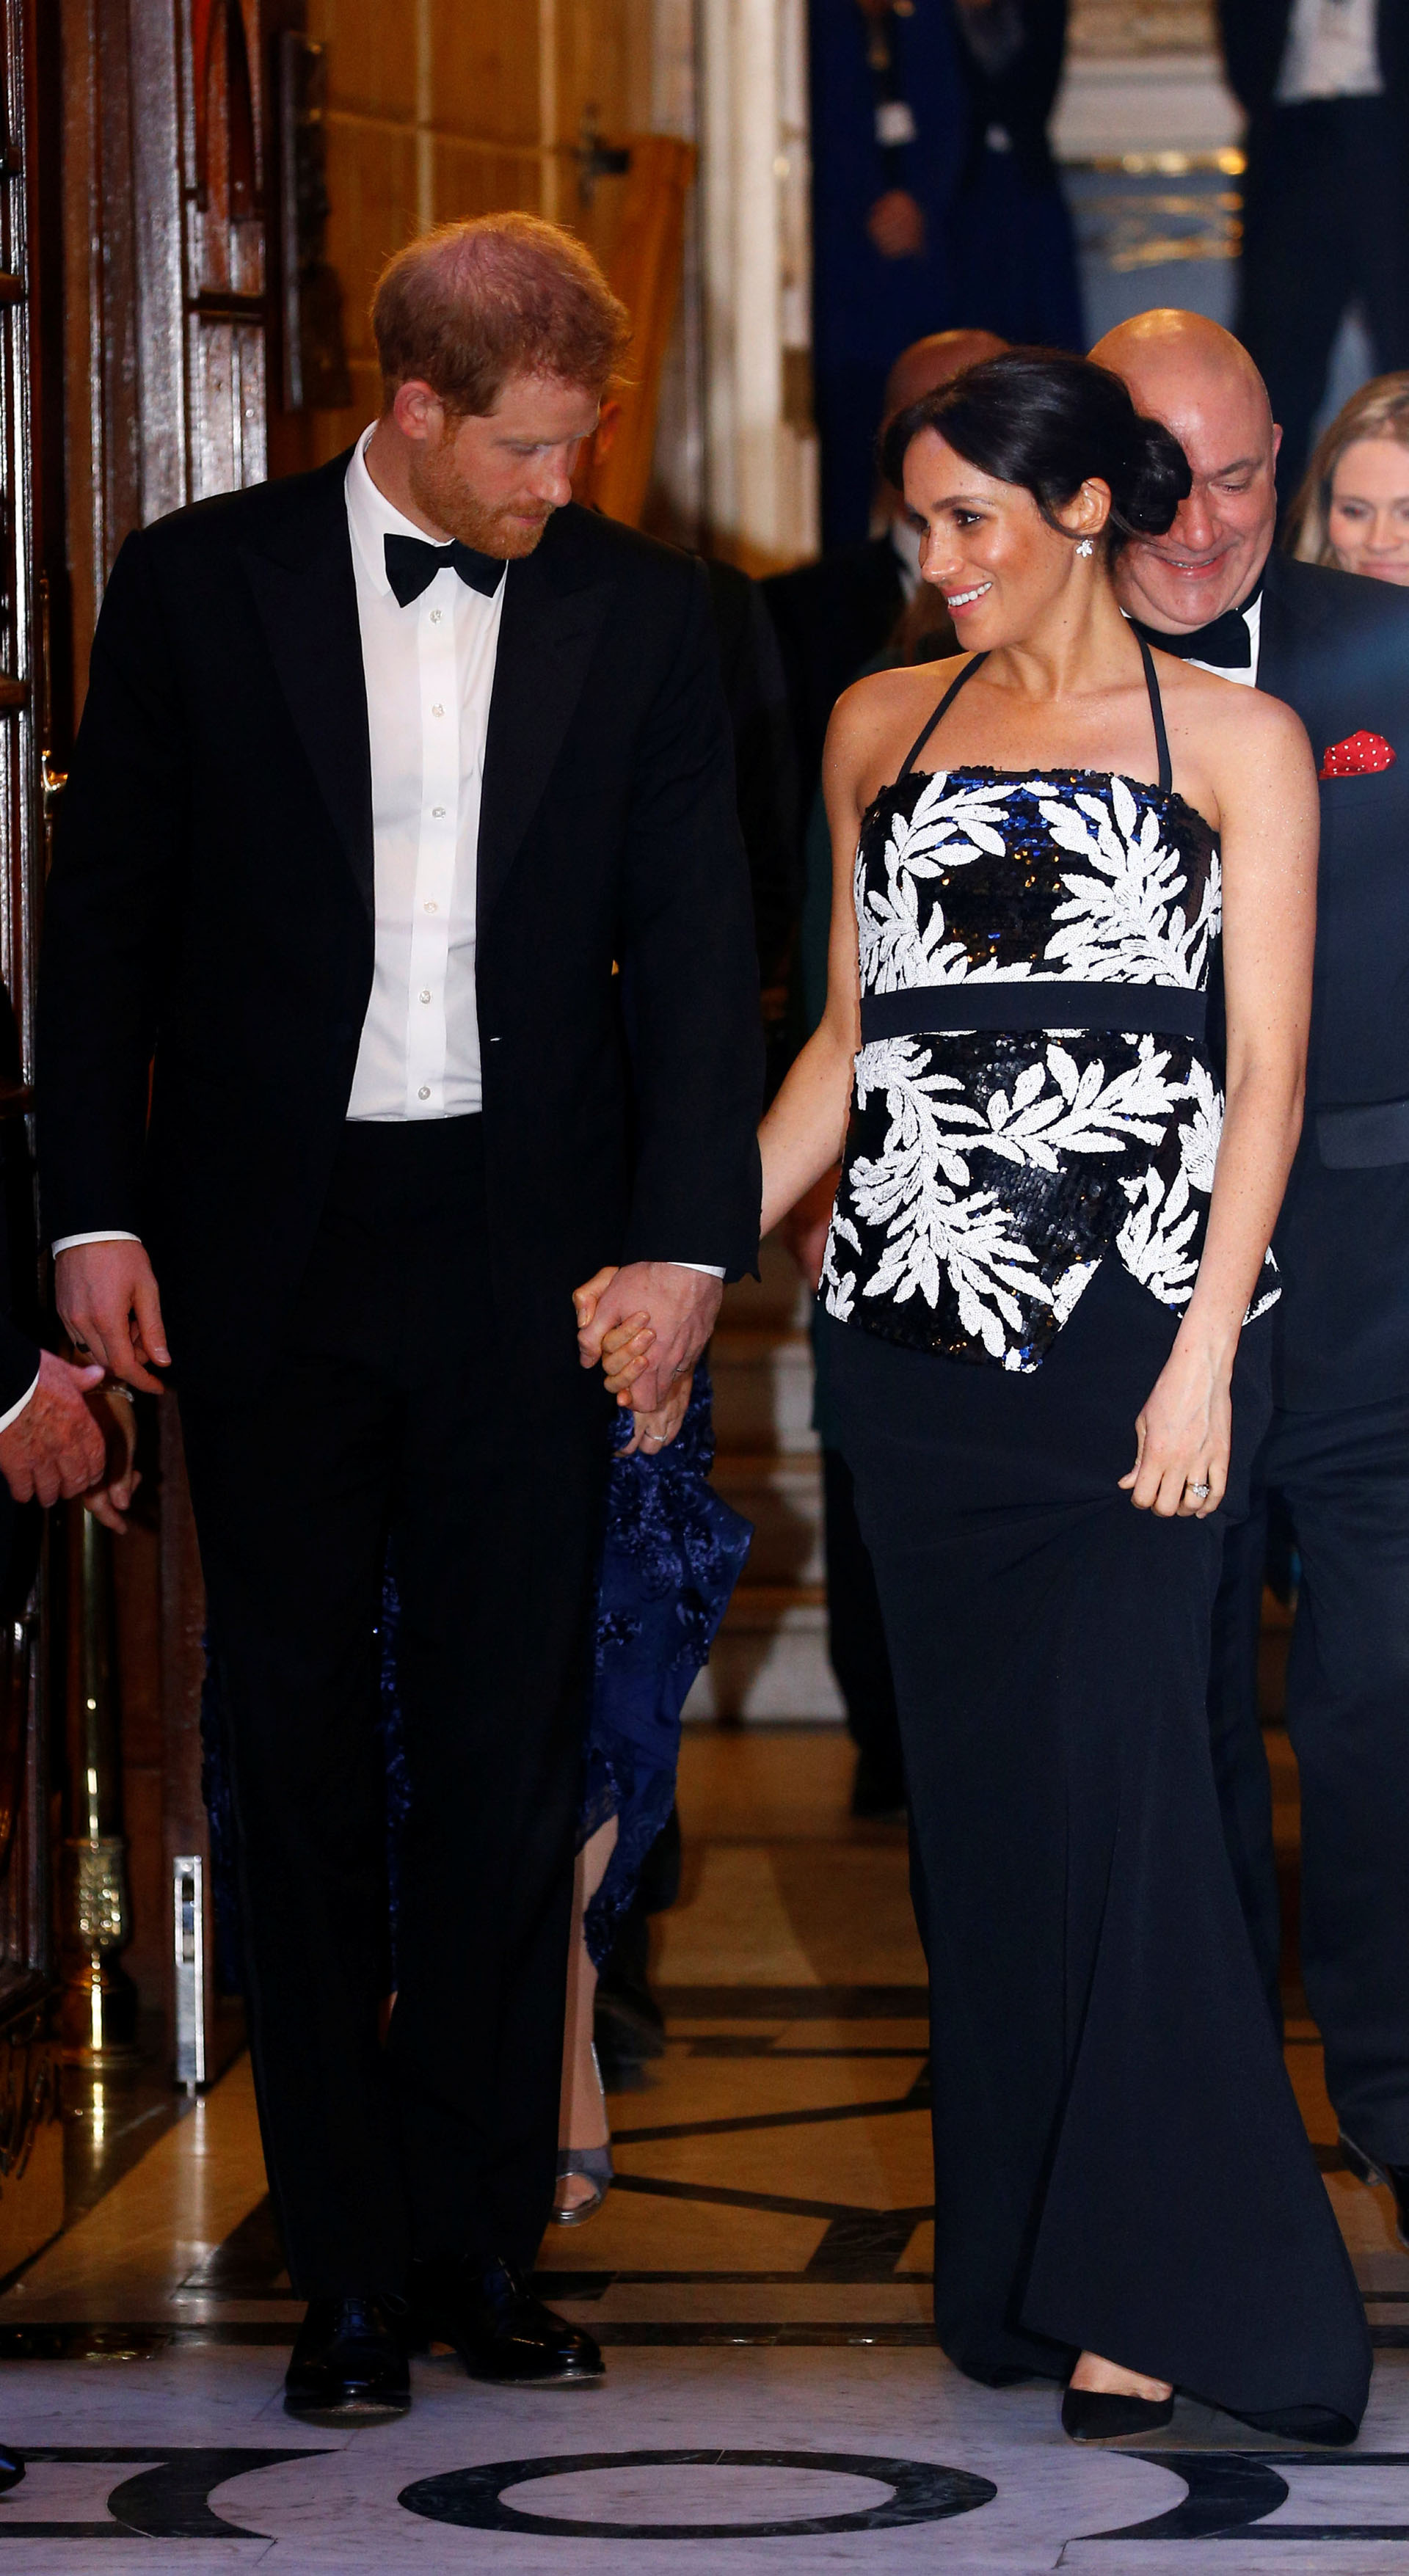 Britain's Prince Harry and Meghan, the Duchess of Sussex, leave after the Royal Variety Performance in London